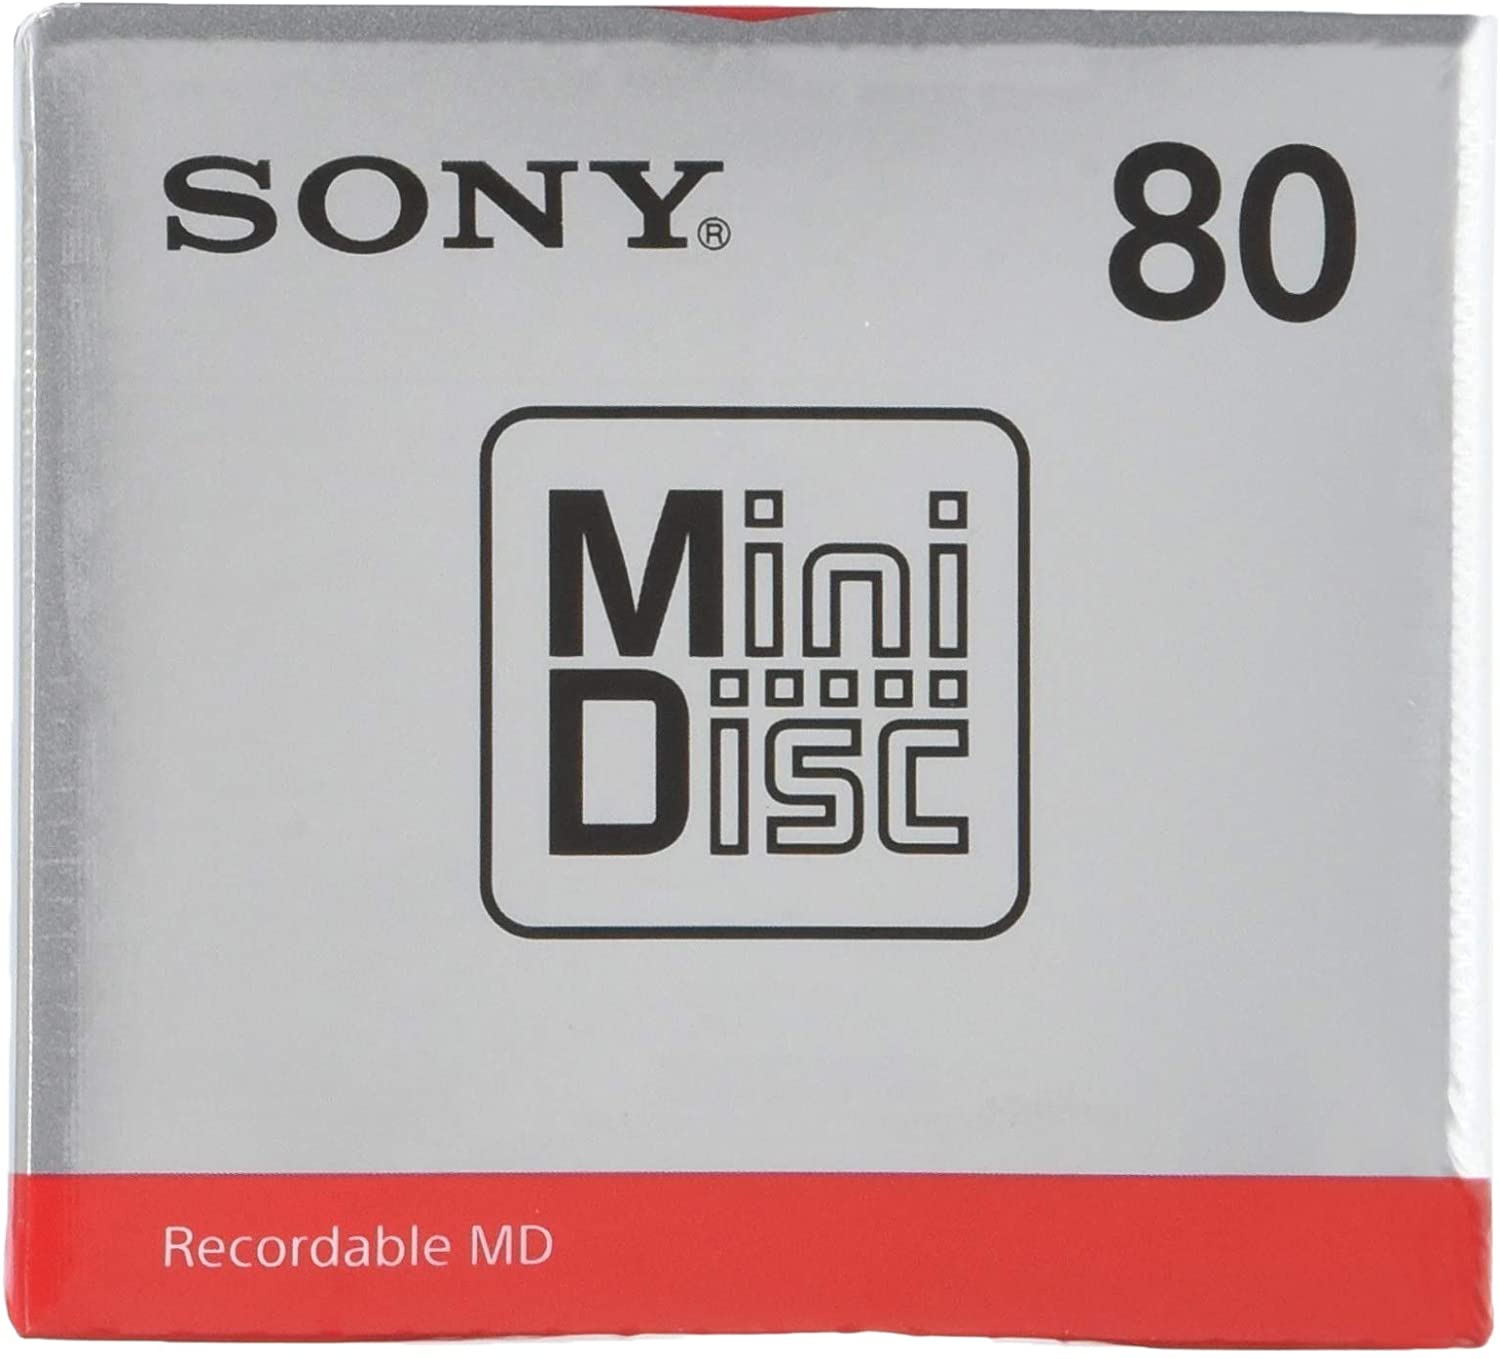 [5 piece ]SONY recording for Mini disk MD 80 minute MDW80T[5 piece ]